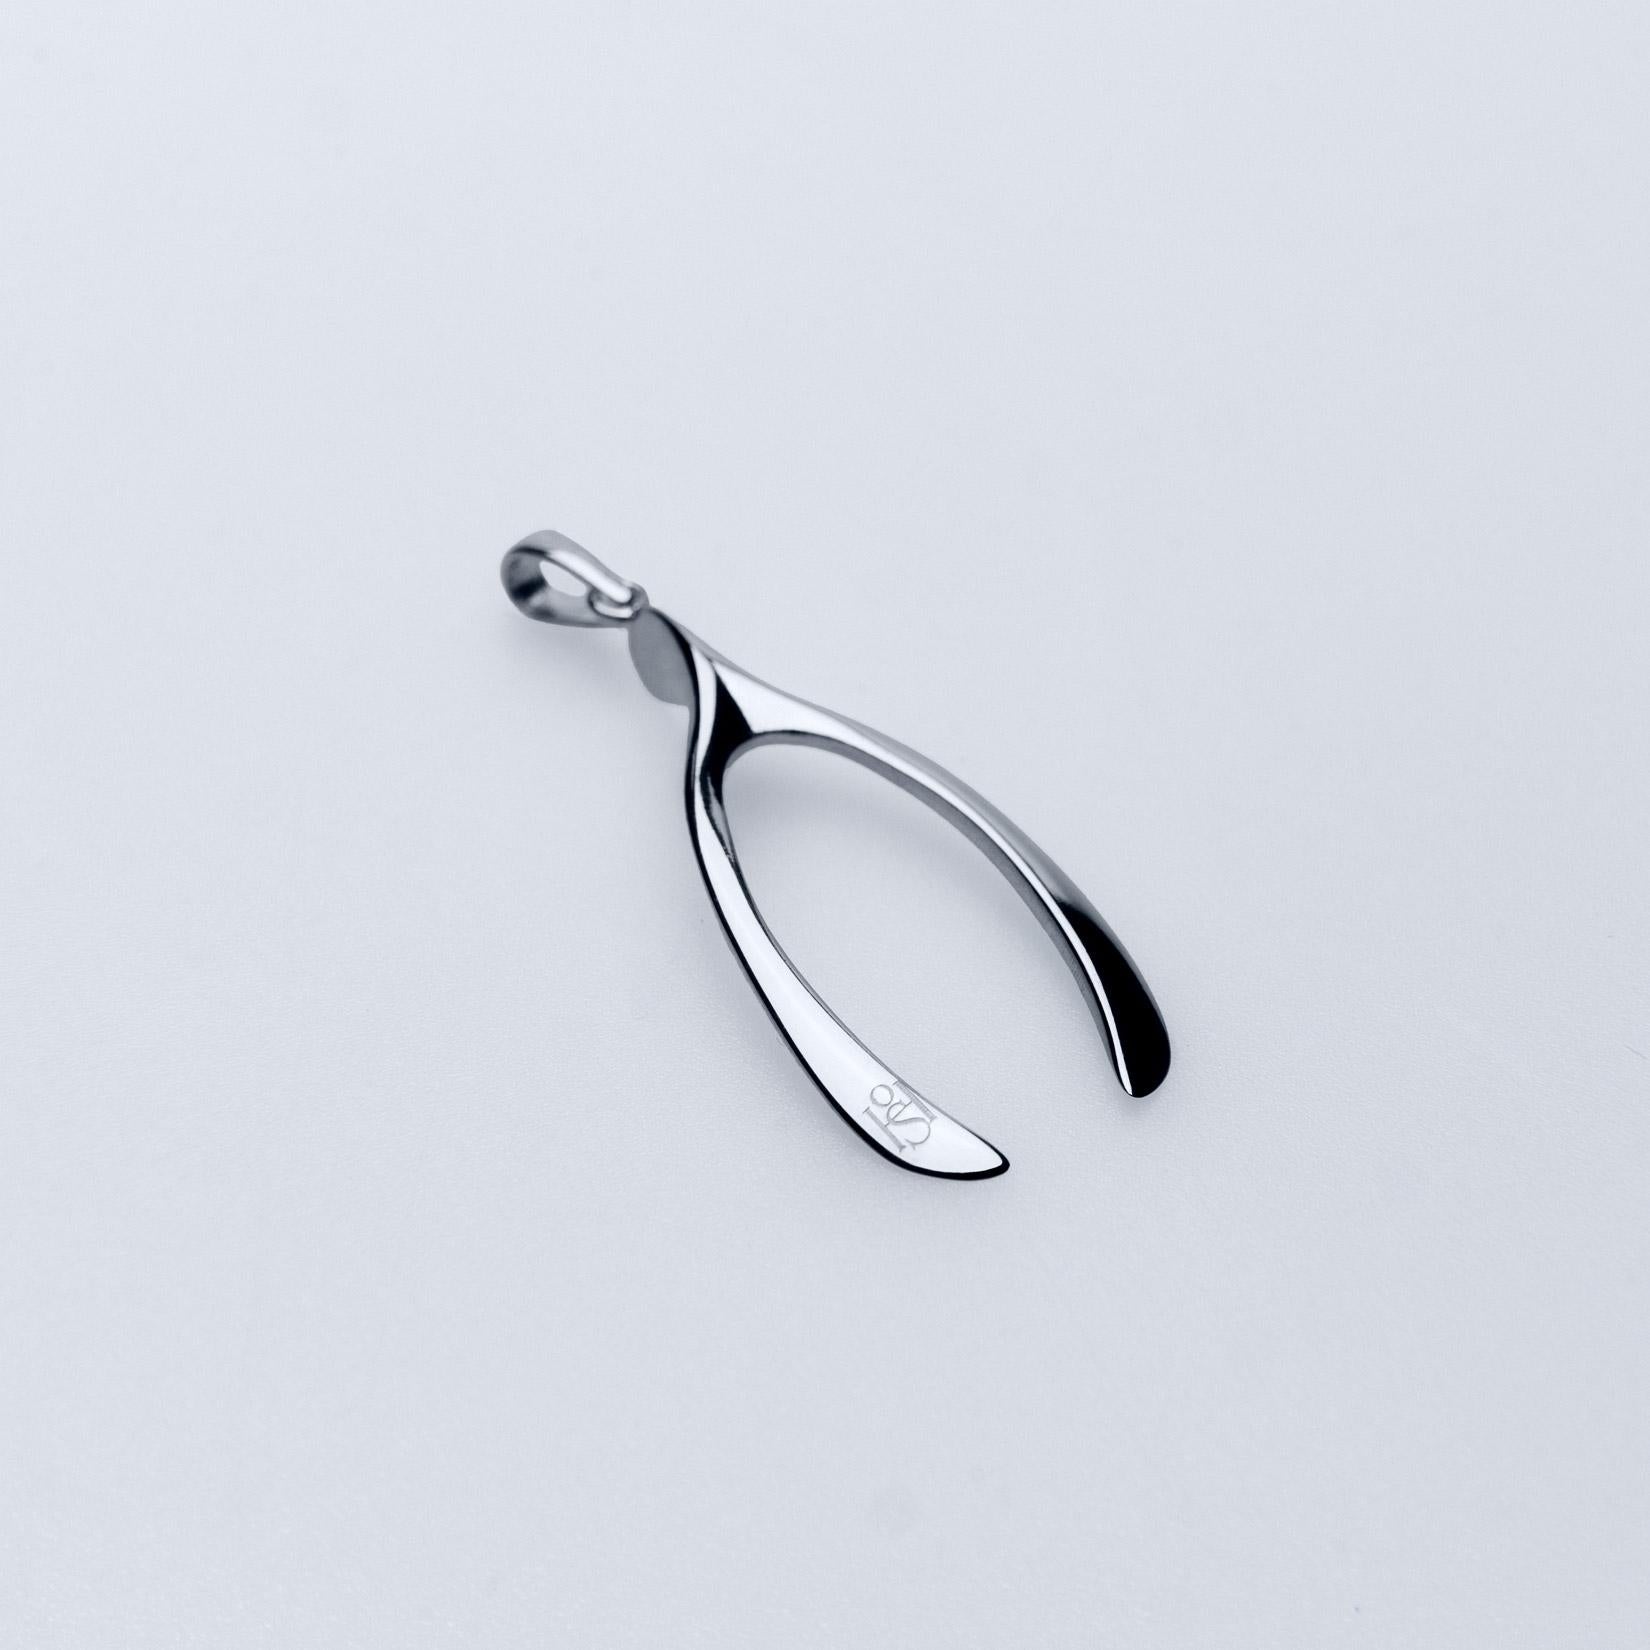 - A touch of nostalgia with the vintage-designed Wishbone charm, reminiscent of childhood's simplest pleasures and crafted from 1-micron 24k yellow or white gold filled 925 sterling silver
- Time-honored craftsmanship, handcrafted by skilled